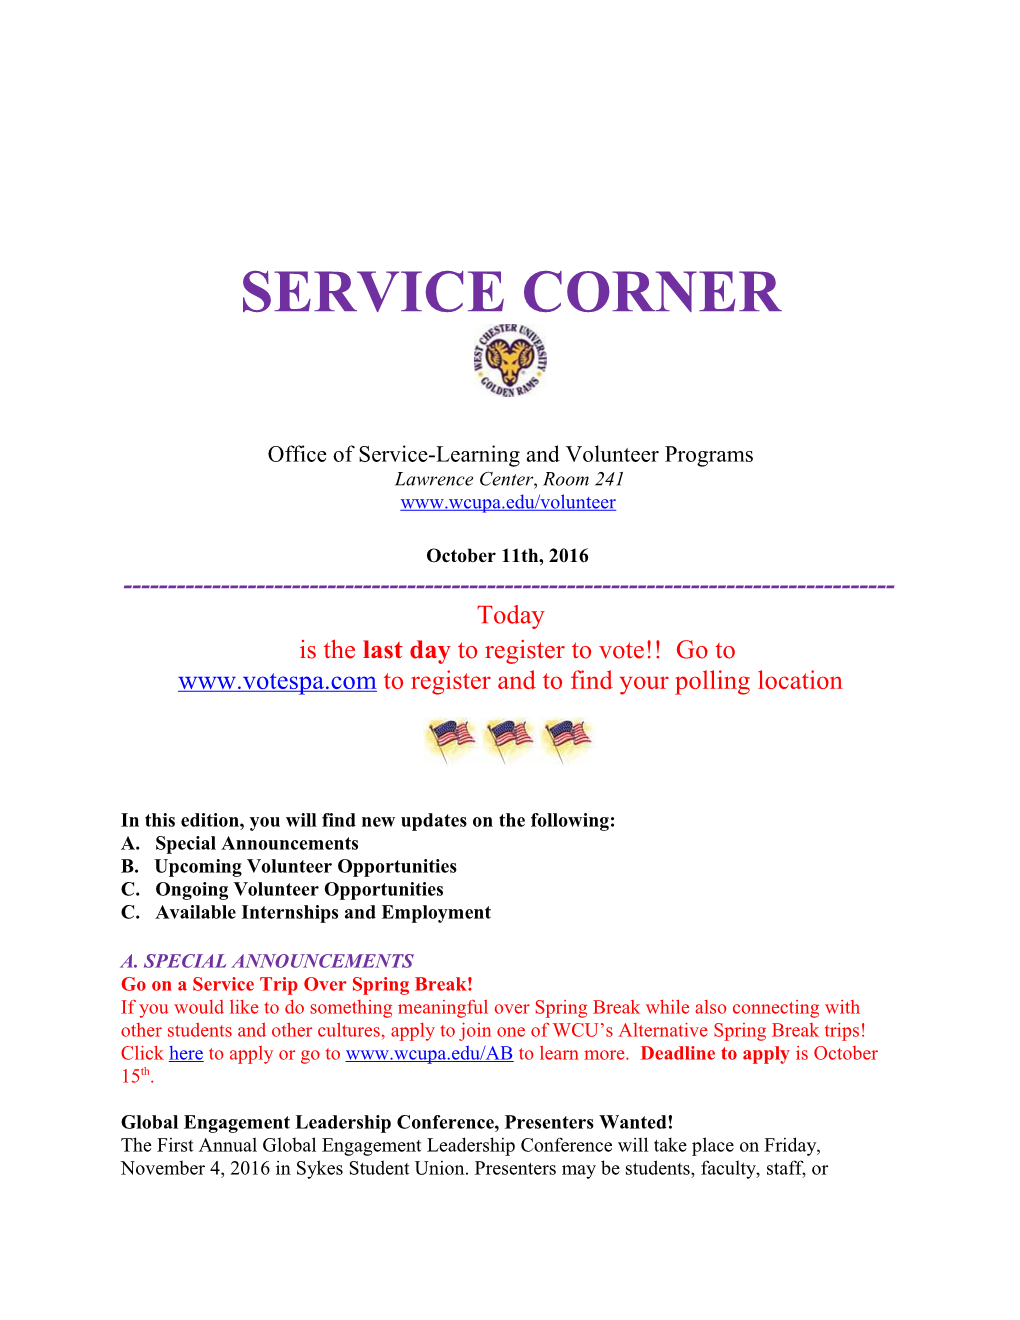 Office of Service-Learning and Volunteer Programs s3